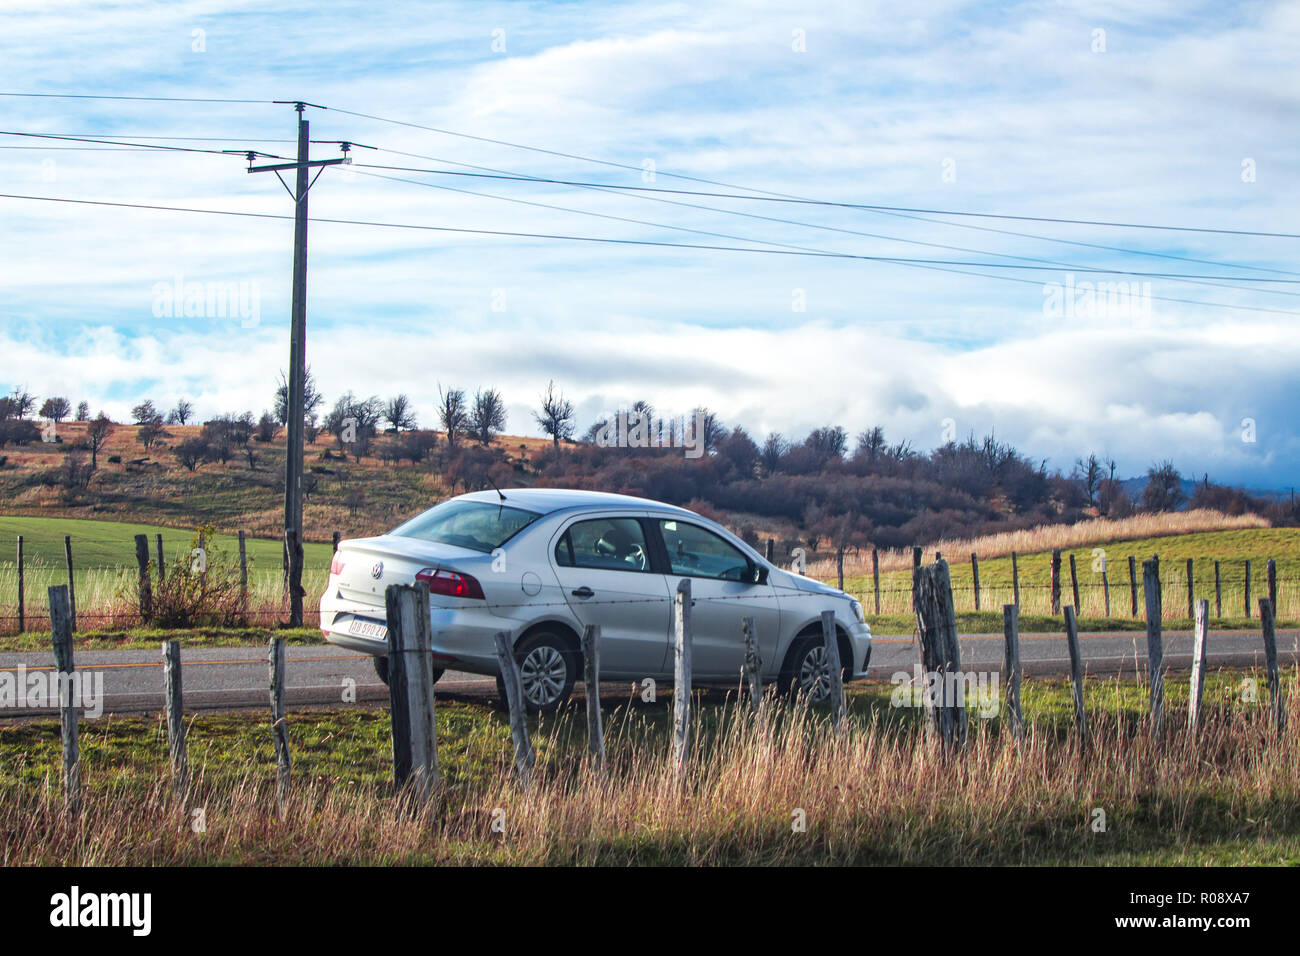 Car parked along the Austral Route at a rural area with wood fence and some grass Stock Photo